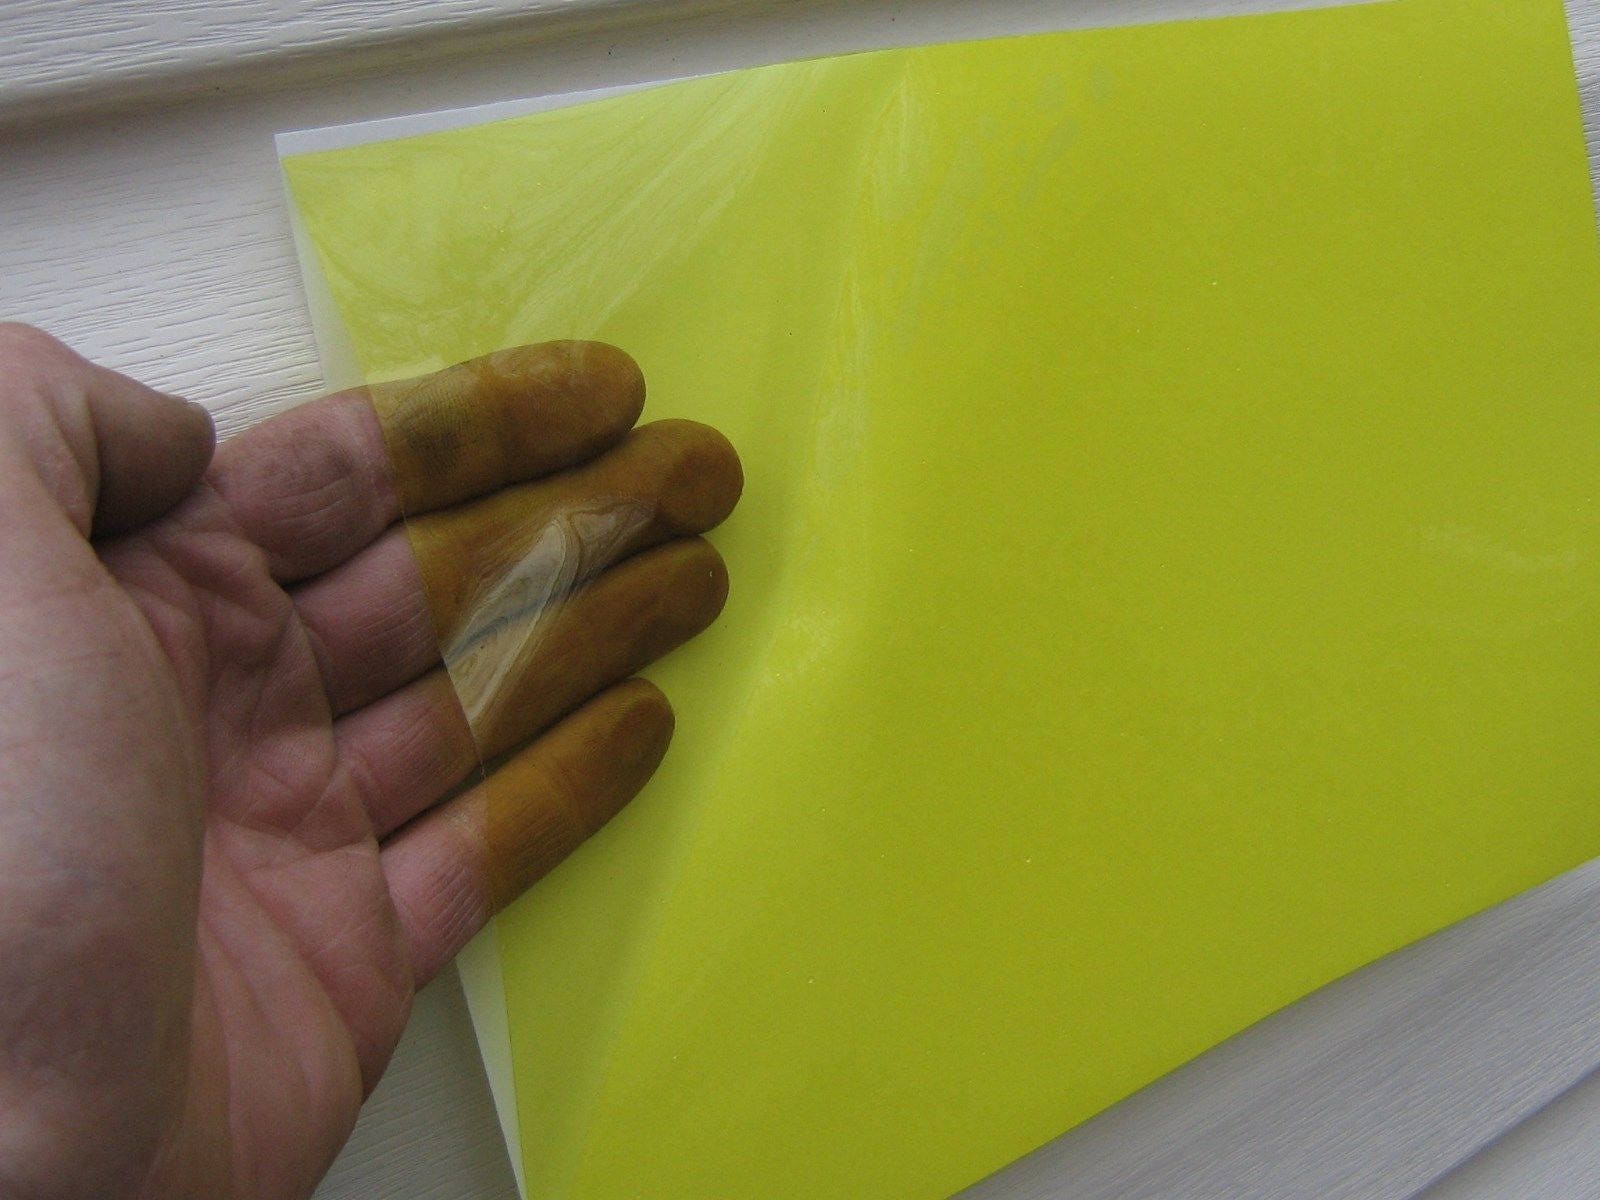 20 Colored Transparent Vinyl Sheets, 8 inch x 12 inch, Adhesive Coated